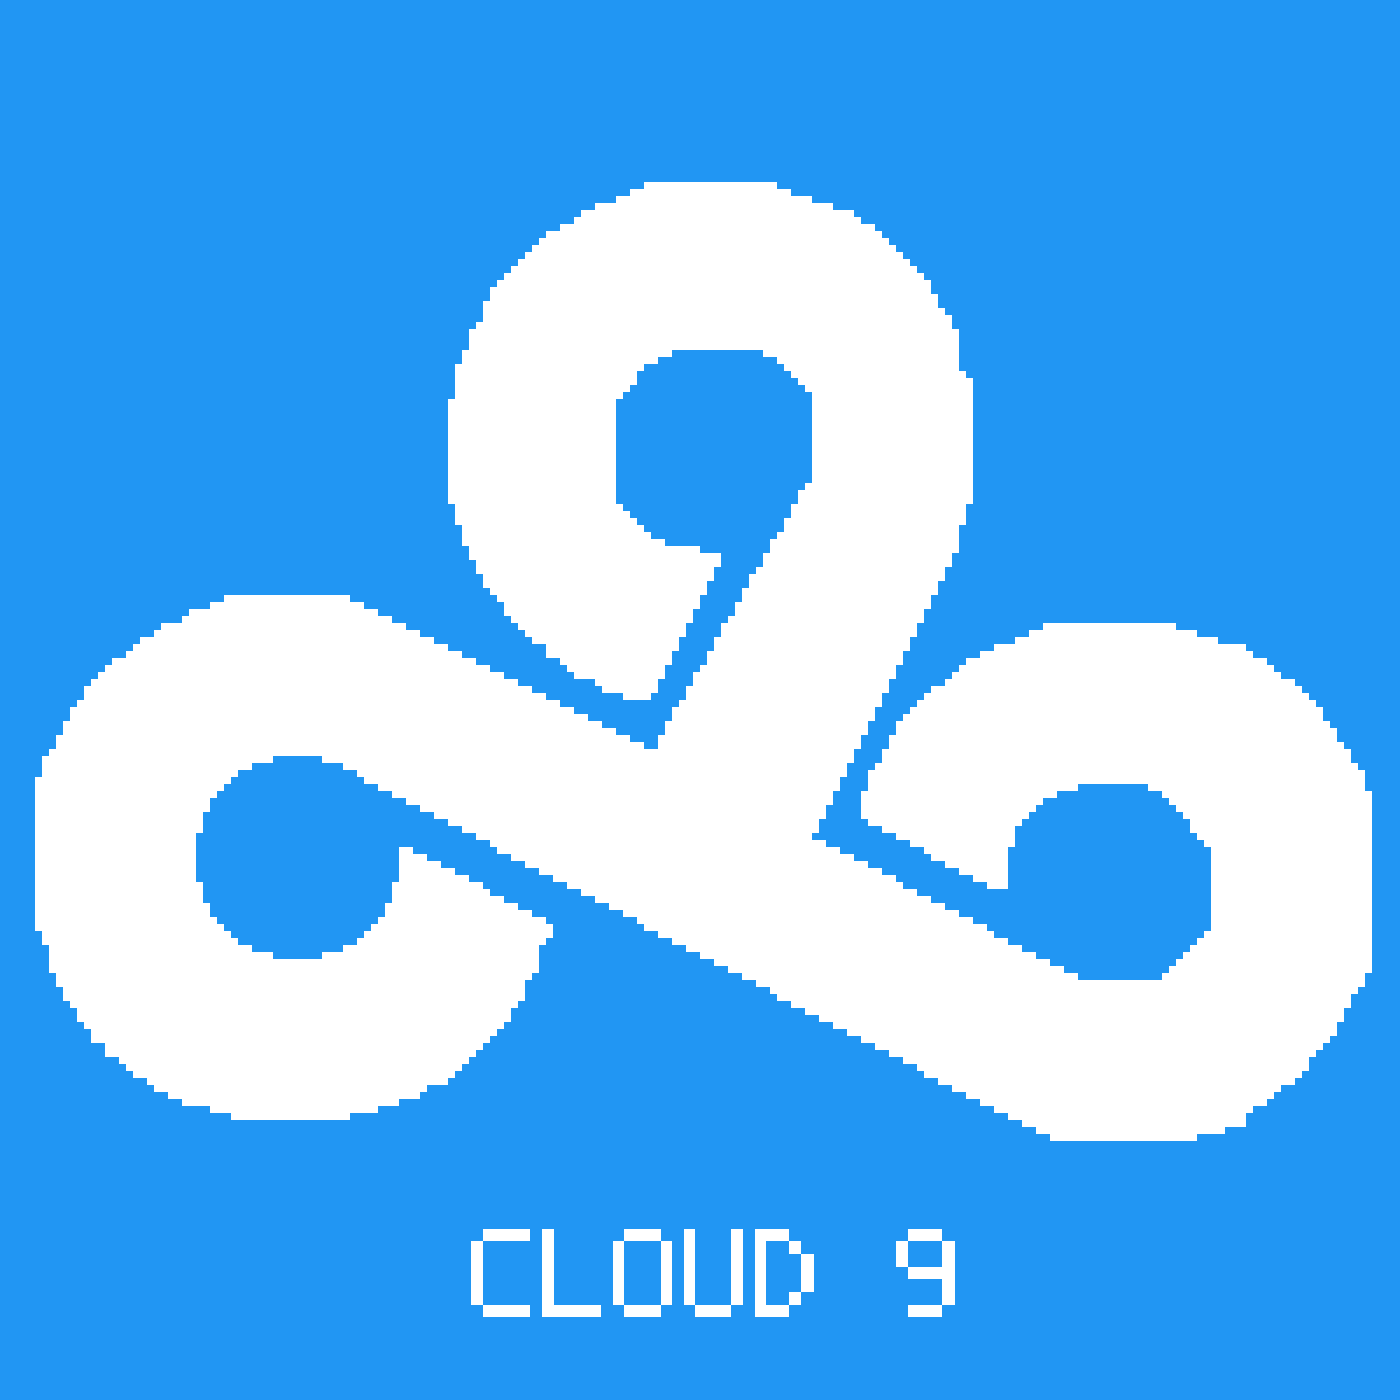 C9 Logo - Since a few people asked for the C9 Logo in Pixel art. Here's